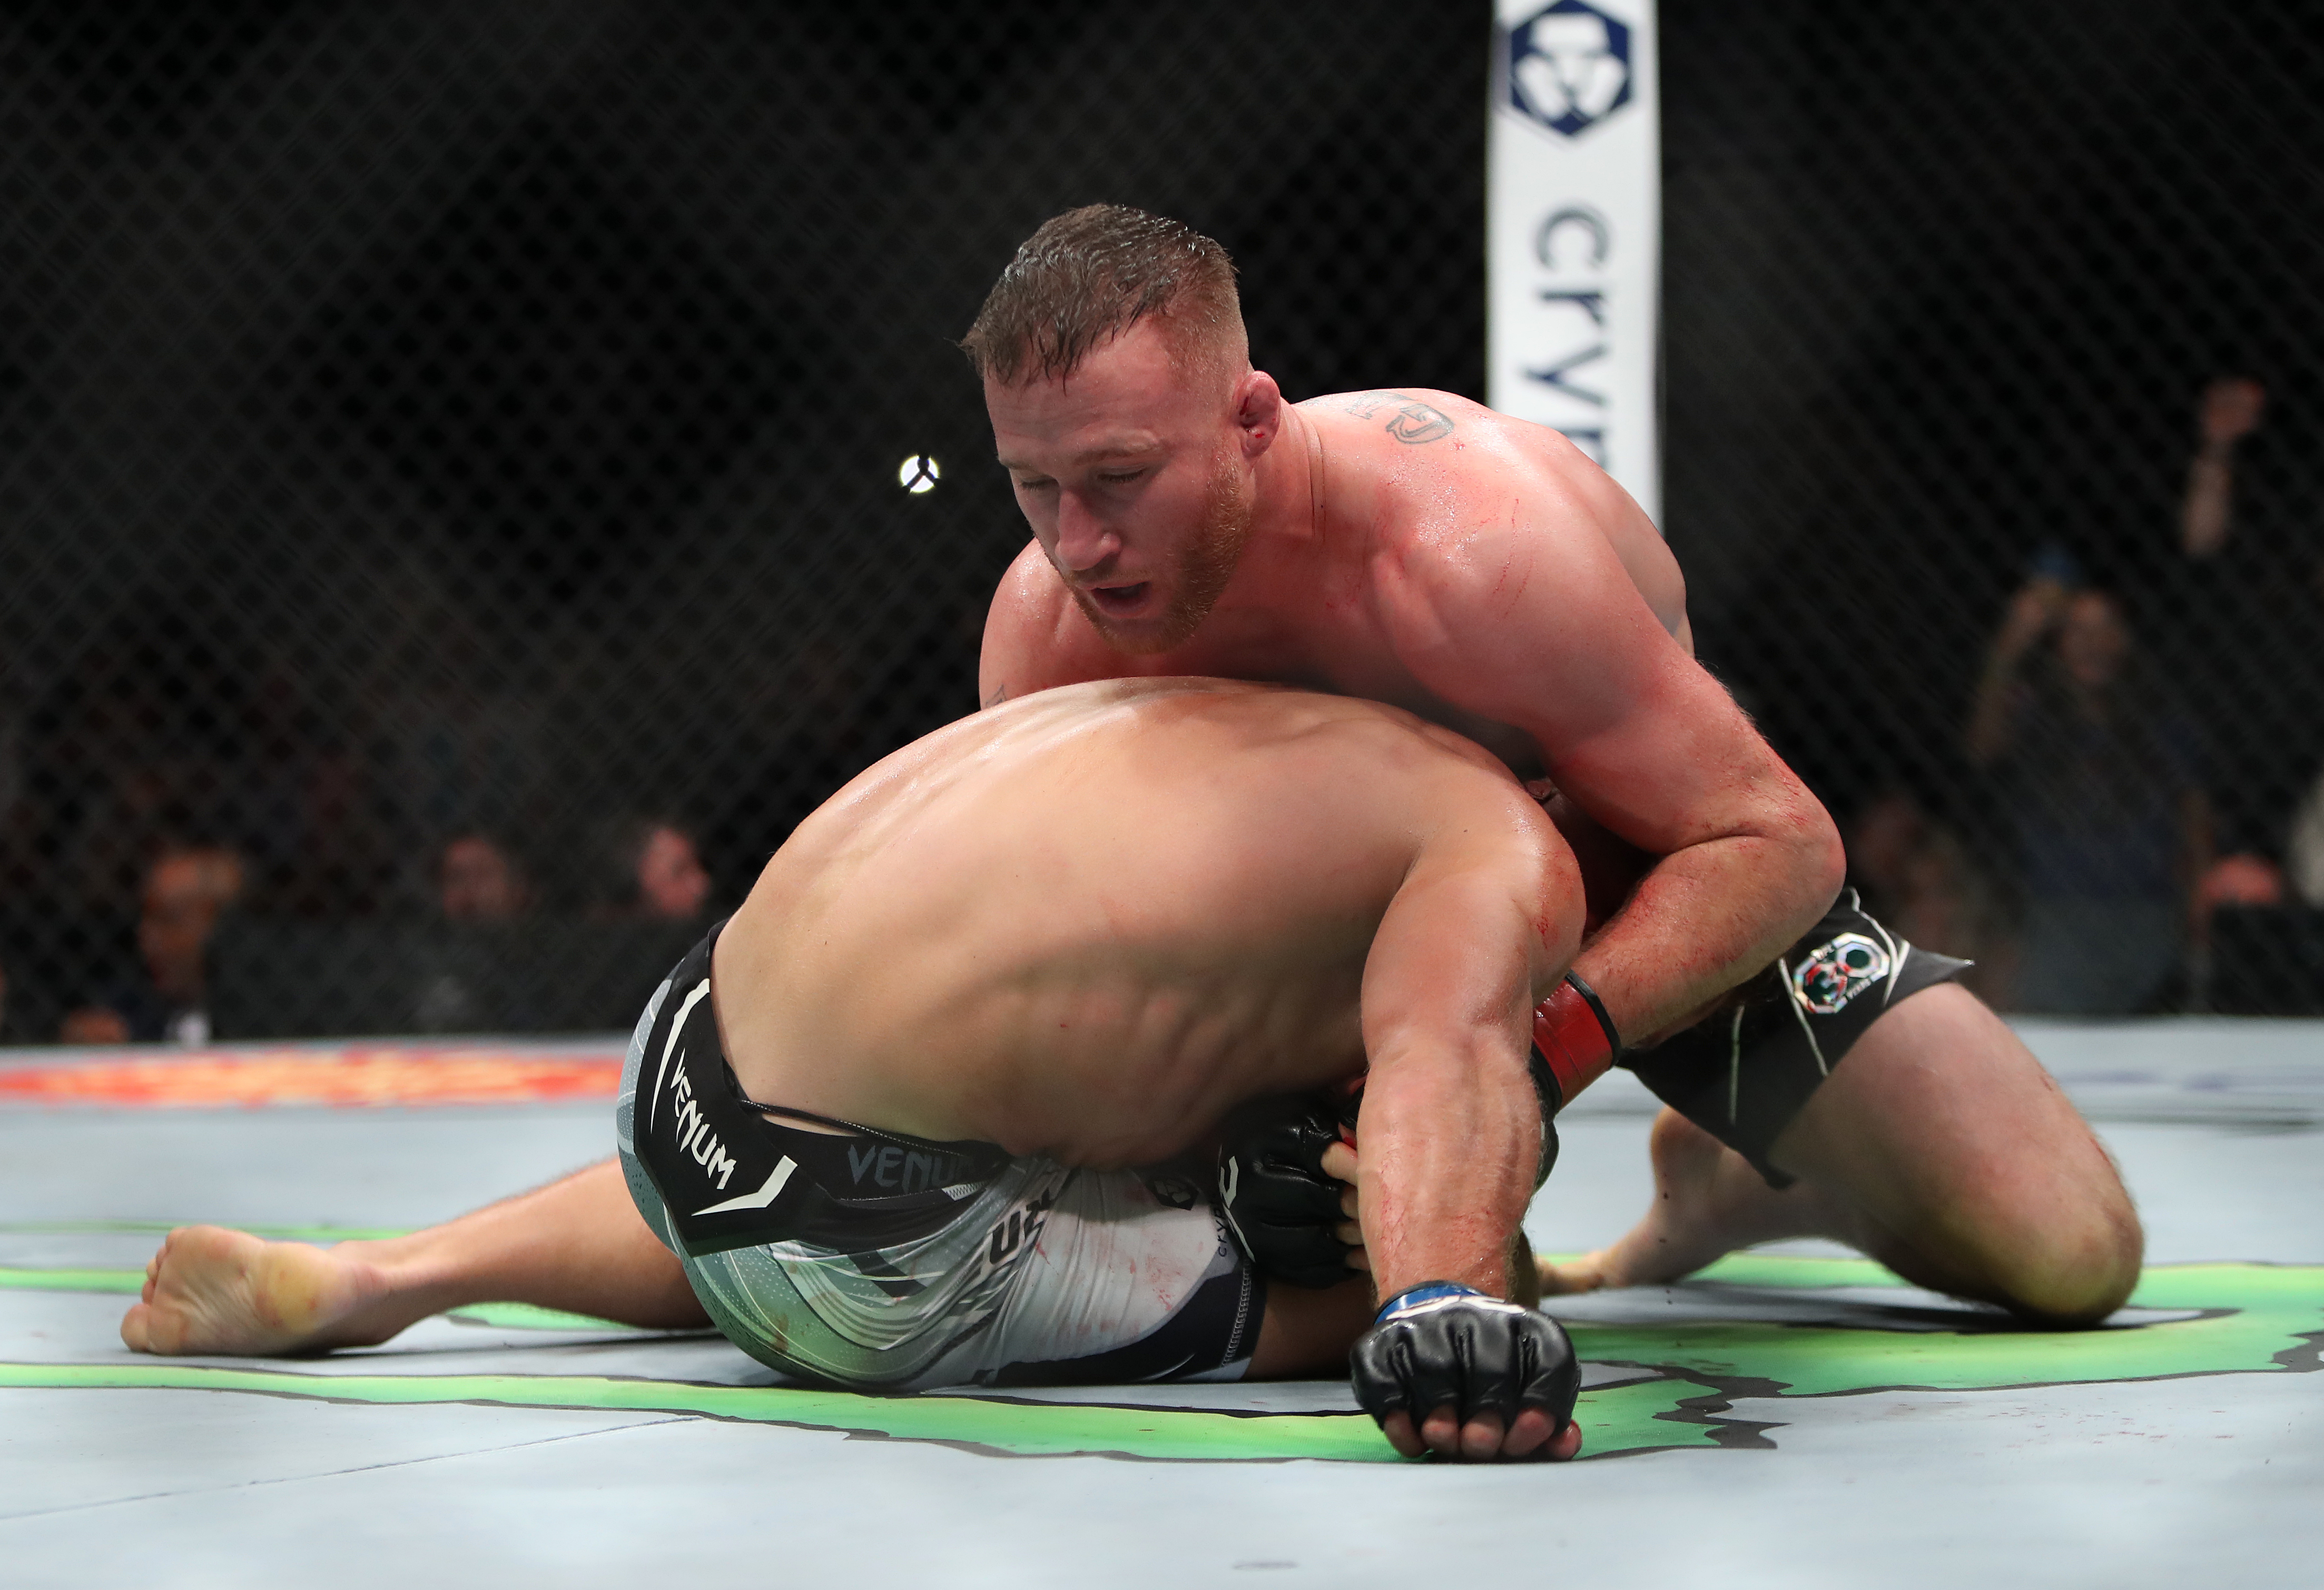 Justin Gaethje earned his first career UFC takedown in the co-main event of UFC 286